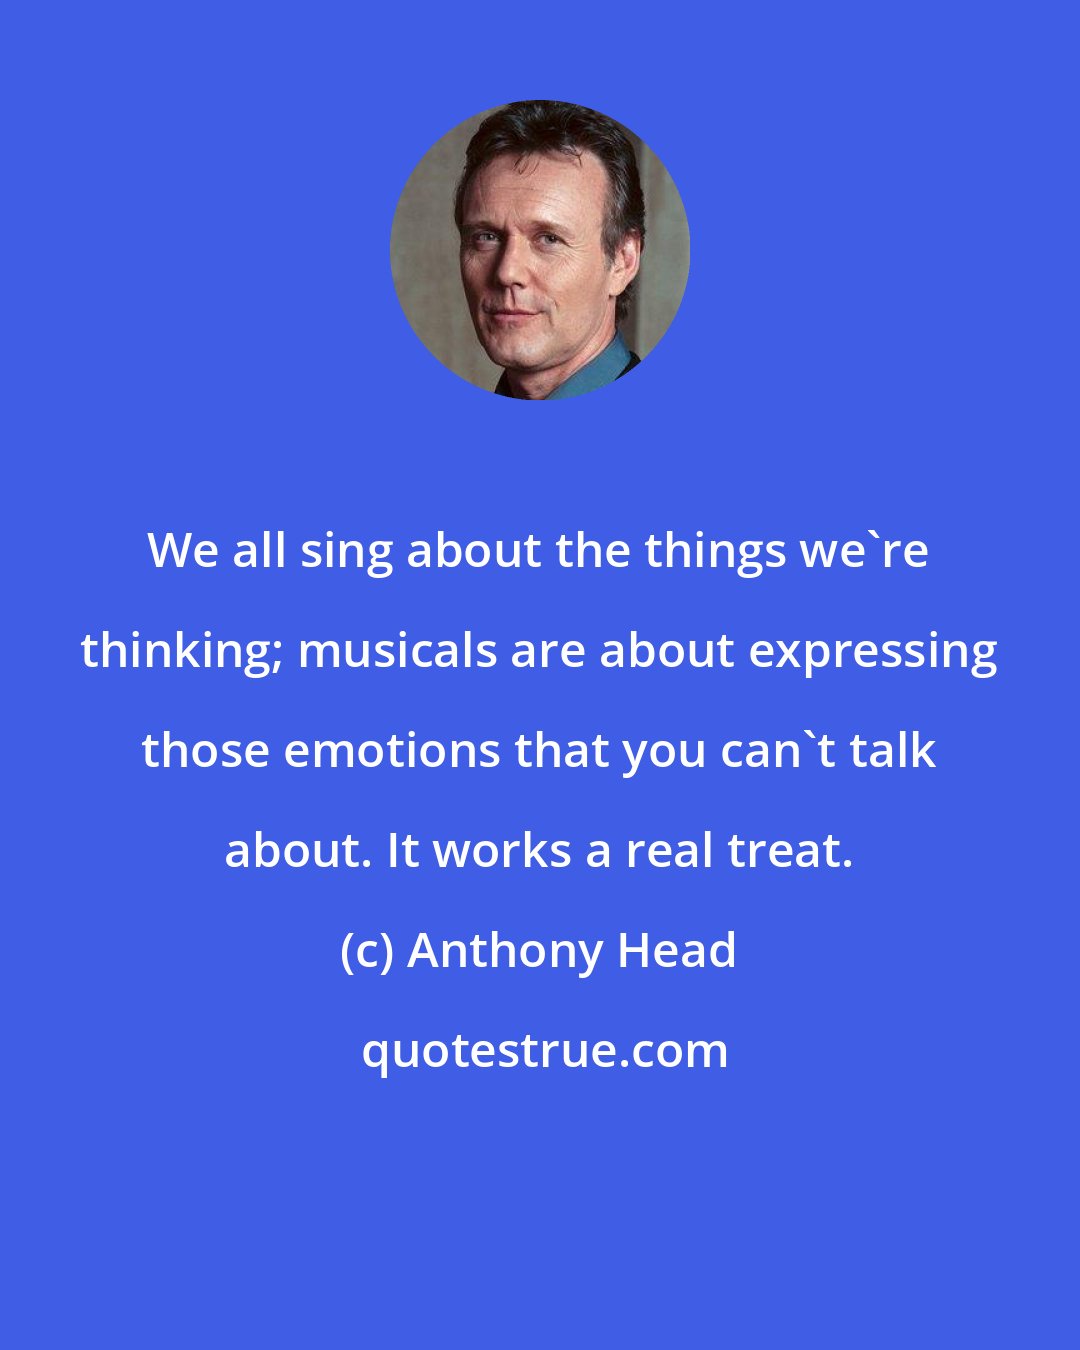 Anthony Head: We all sing about the things we're thinking; musicals are about expressing those emotions that you can't talk about. It works a real treat.